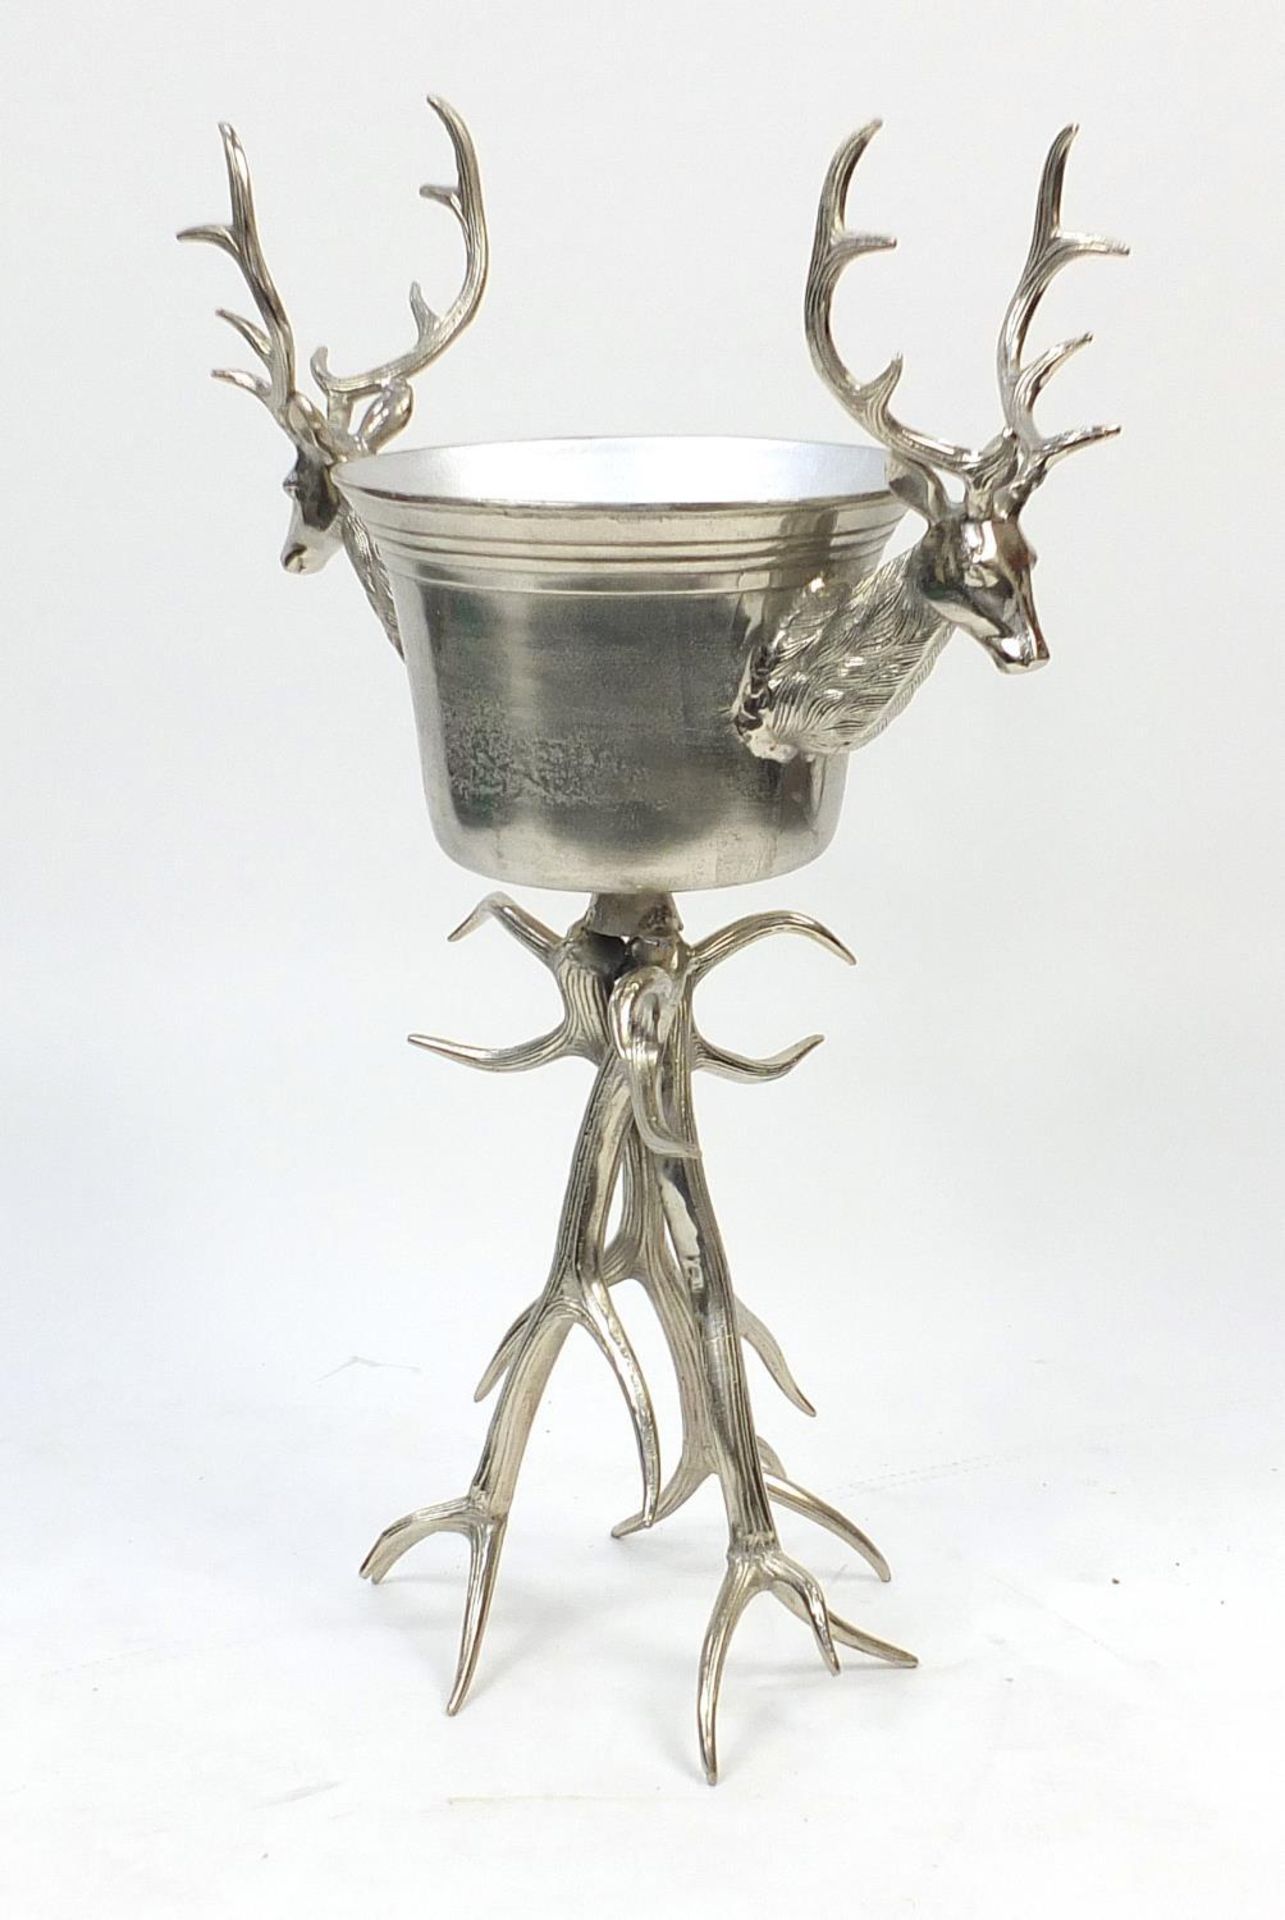 Silvered staghorn design floor standing ice bucket with stag's heads, 104.5 high x 70cm wide : - Image 2 of 4